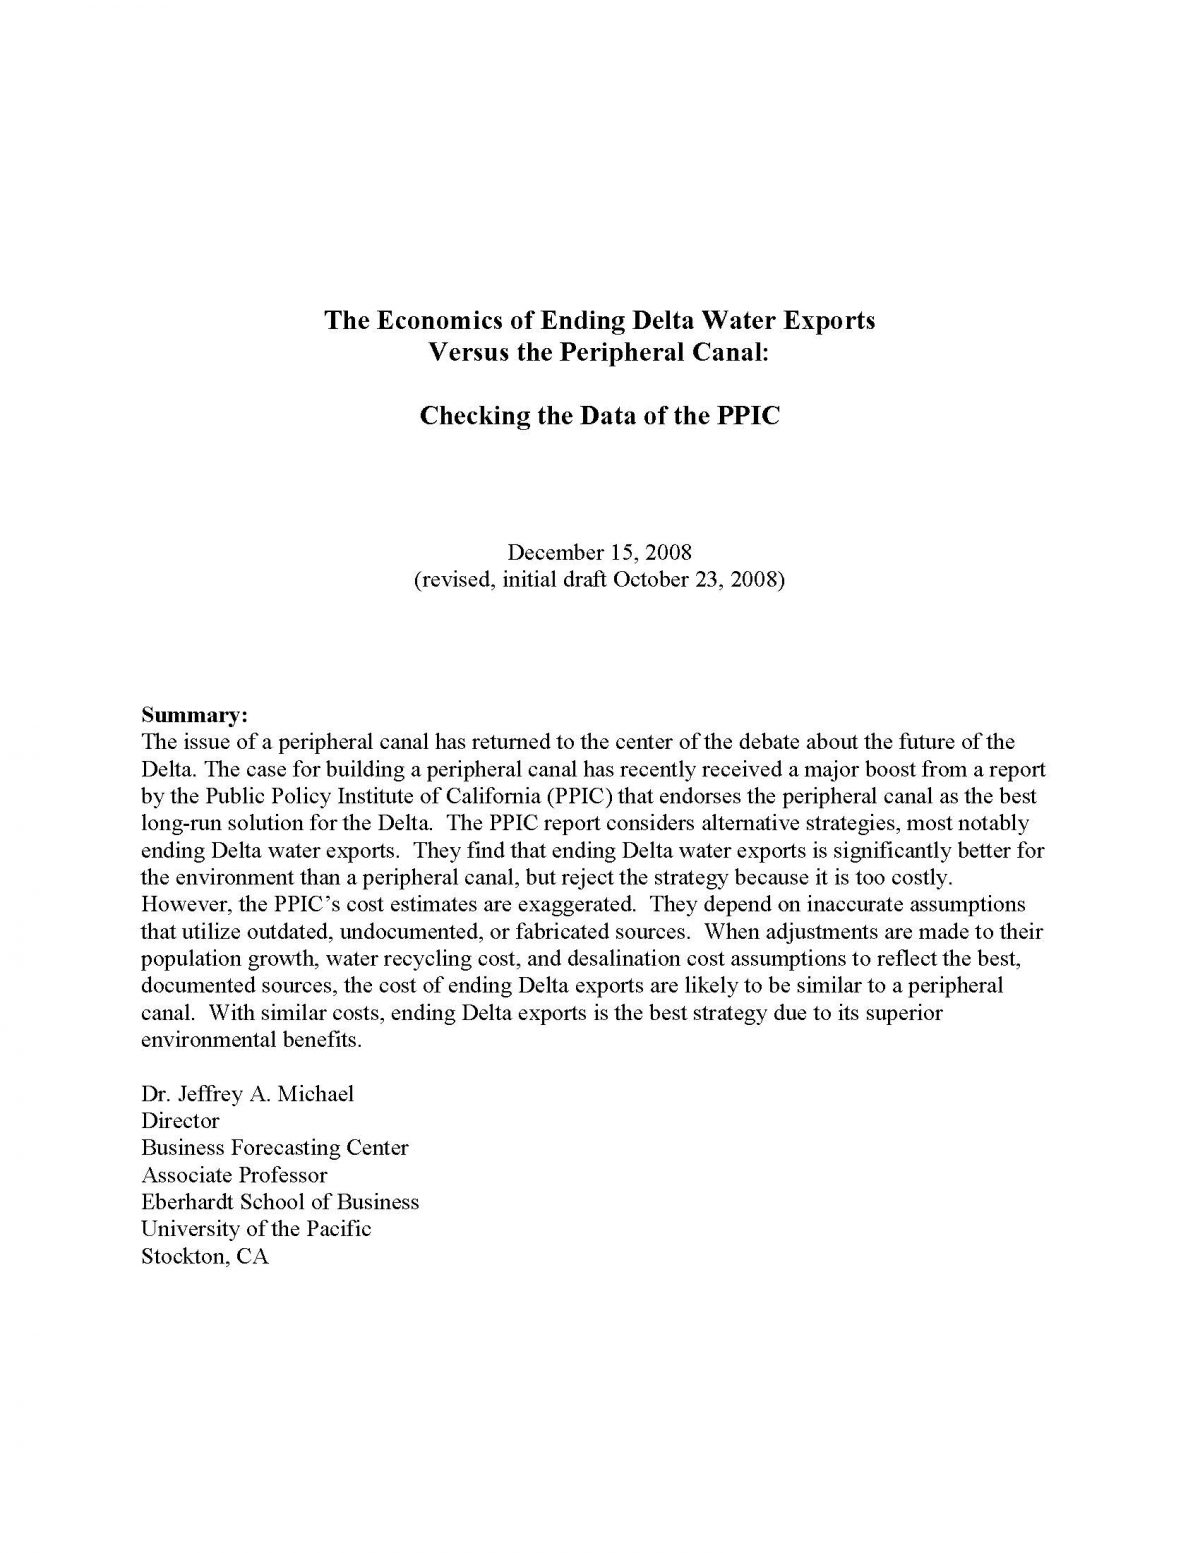 The Economics of Ending Delta Water Exports Versus the Peripheral Canal: Checking the Data of the PPIC